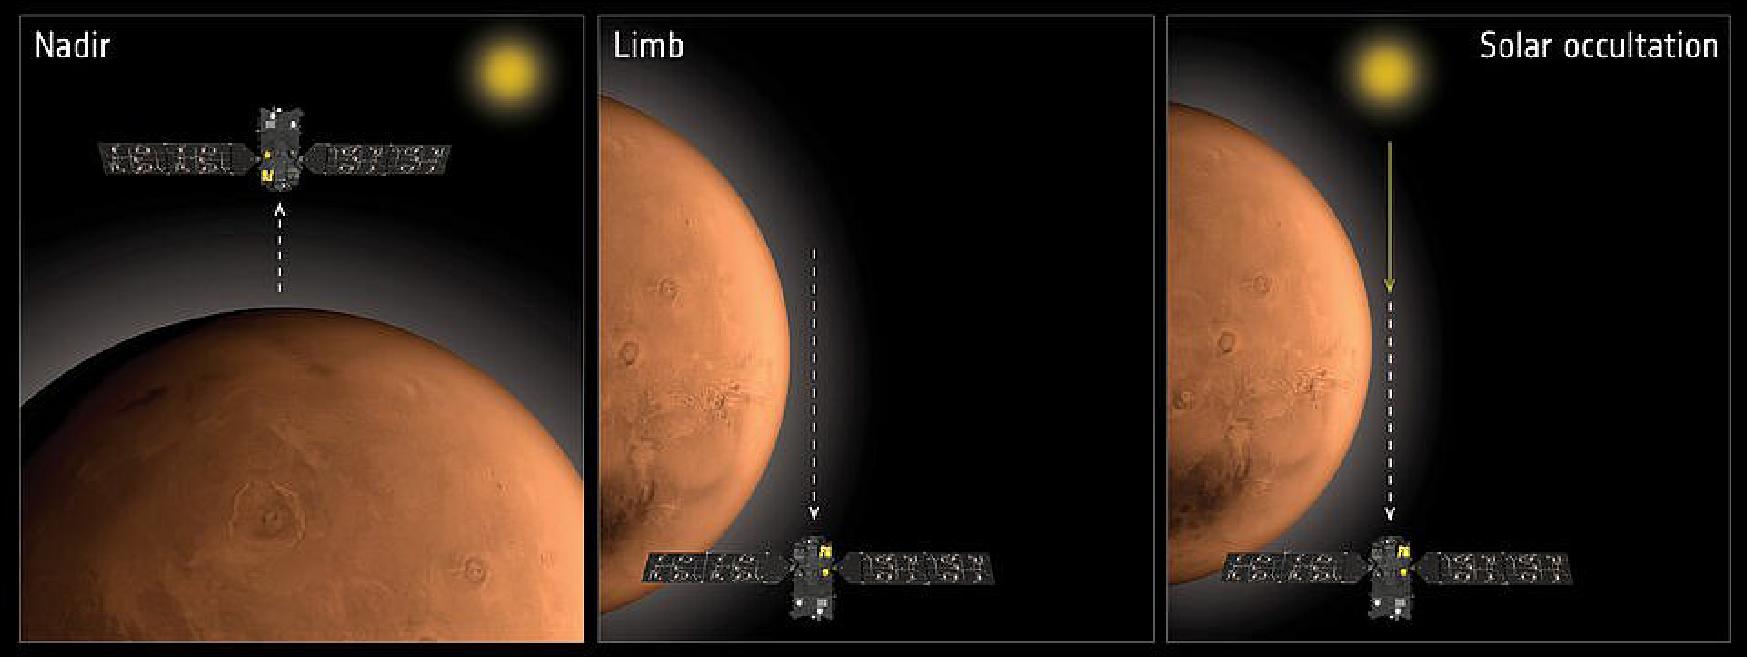 Figure 36: How ExoMars studies the atmosphere. The ExoMars Trace Gas Orbiter will analyze the atmosphere of Mars with two spectrometers: the Atmospheric Chemistry Suite (ACS) and the Nadir and Occultation for MArs Discovery, or NOMAD. - The graphic shows a simple representation (not to scale) of the three observing modes that will be used. In nadir mode (left) the spacecraft looks directly at the sunlight reflected from the surface and atmosphere of Mars. In limb mode (centre) it looks across the martian horizon at emission from the atmosphere. In solar occultation mode (right), the instruments point through the atmosphere toward the Sun and observe how different atmospheric ingredients absorb the Sun’s light. - Since different chemicals have distinctive fingerprints, these observations provide a detailed inventory of the atmosphere’s composition. These observations are critical to detect atmospheric gases that exist in tiny amounts, but which play an important role in determining if Mars is active today – either geologically or biologically speaking. - Note that the orientation of the spacecraft is not true: it is shown here with the instrument panel facing the viewer for illustrative purposes only. ACS is represented by the yellow square shape at the front of the orbiter; NOMAD is the grey box also at the front. Click here for a labelled diagram (image credit: ESA/ATG medialab)